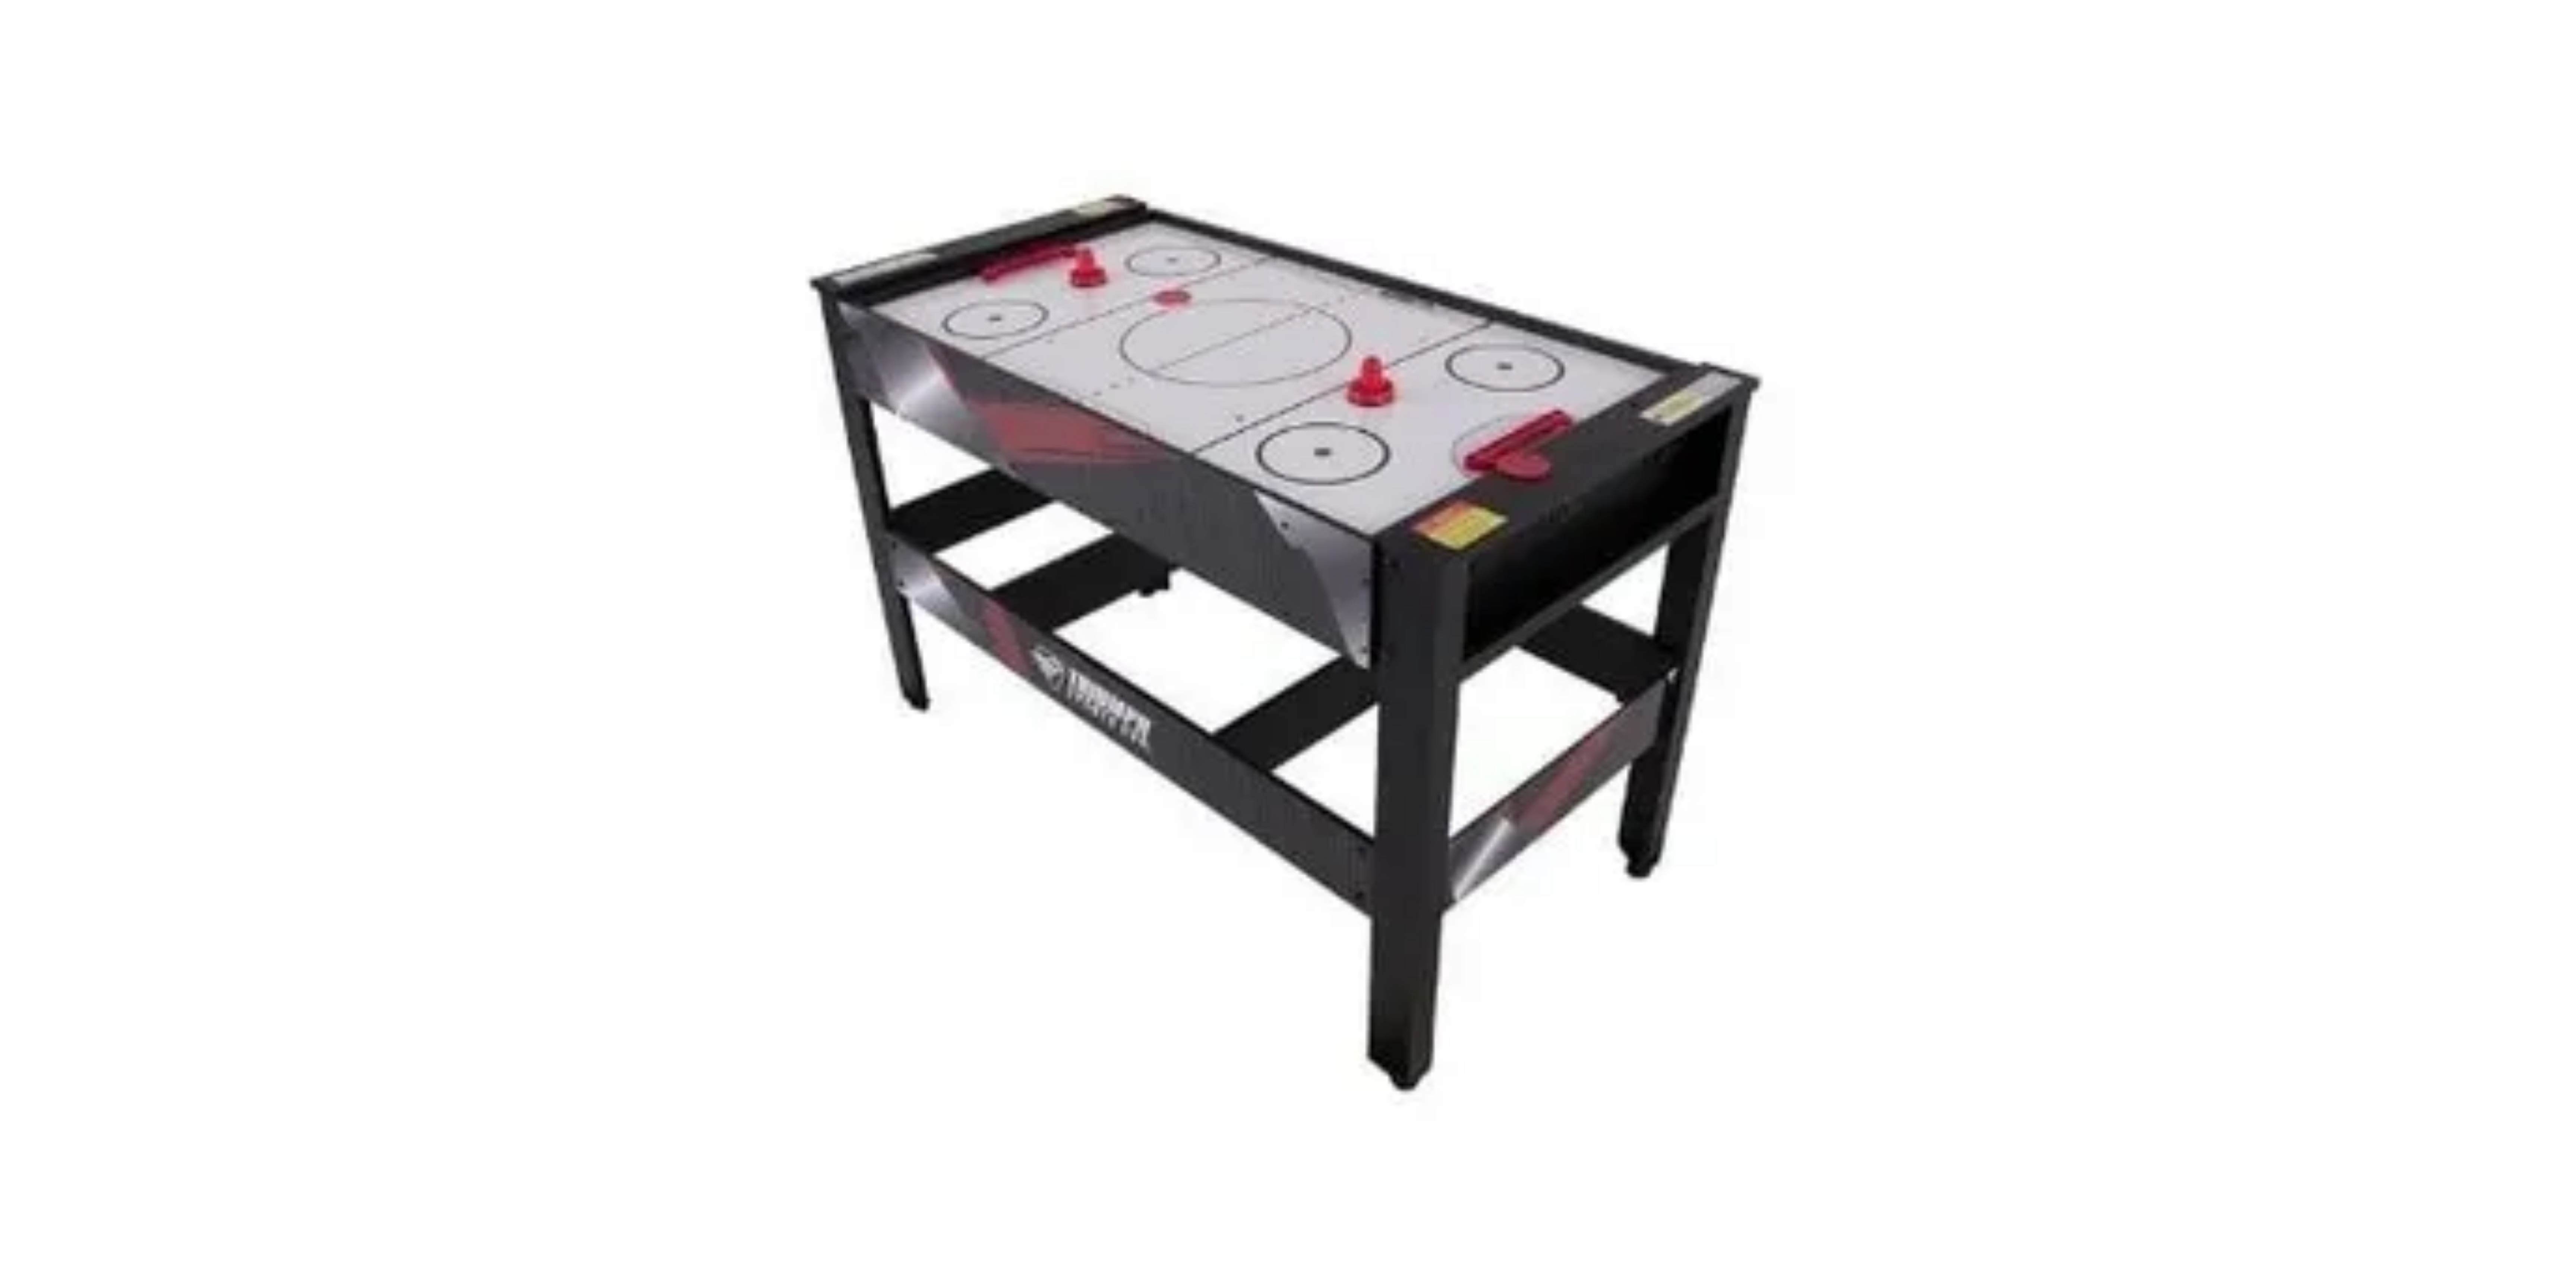 Air Hockey, Billiards, Table Tennis, and Launch Football in game table with a rotating swivel